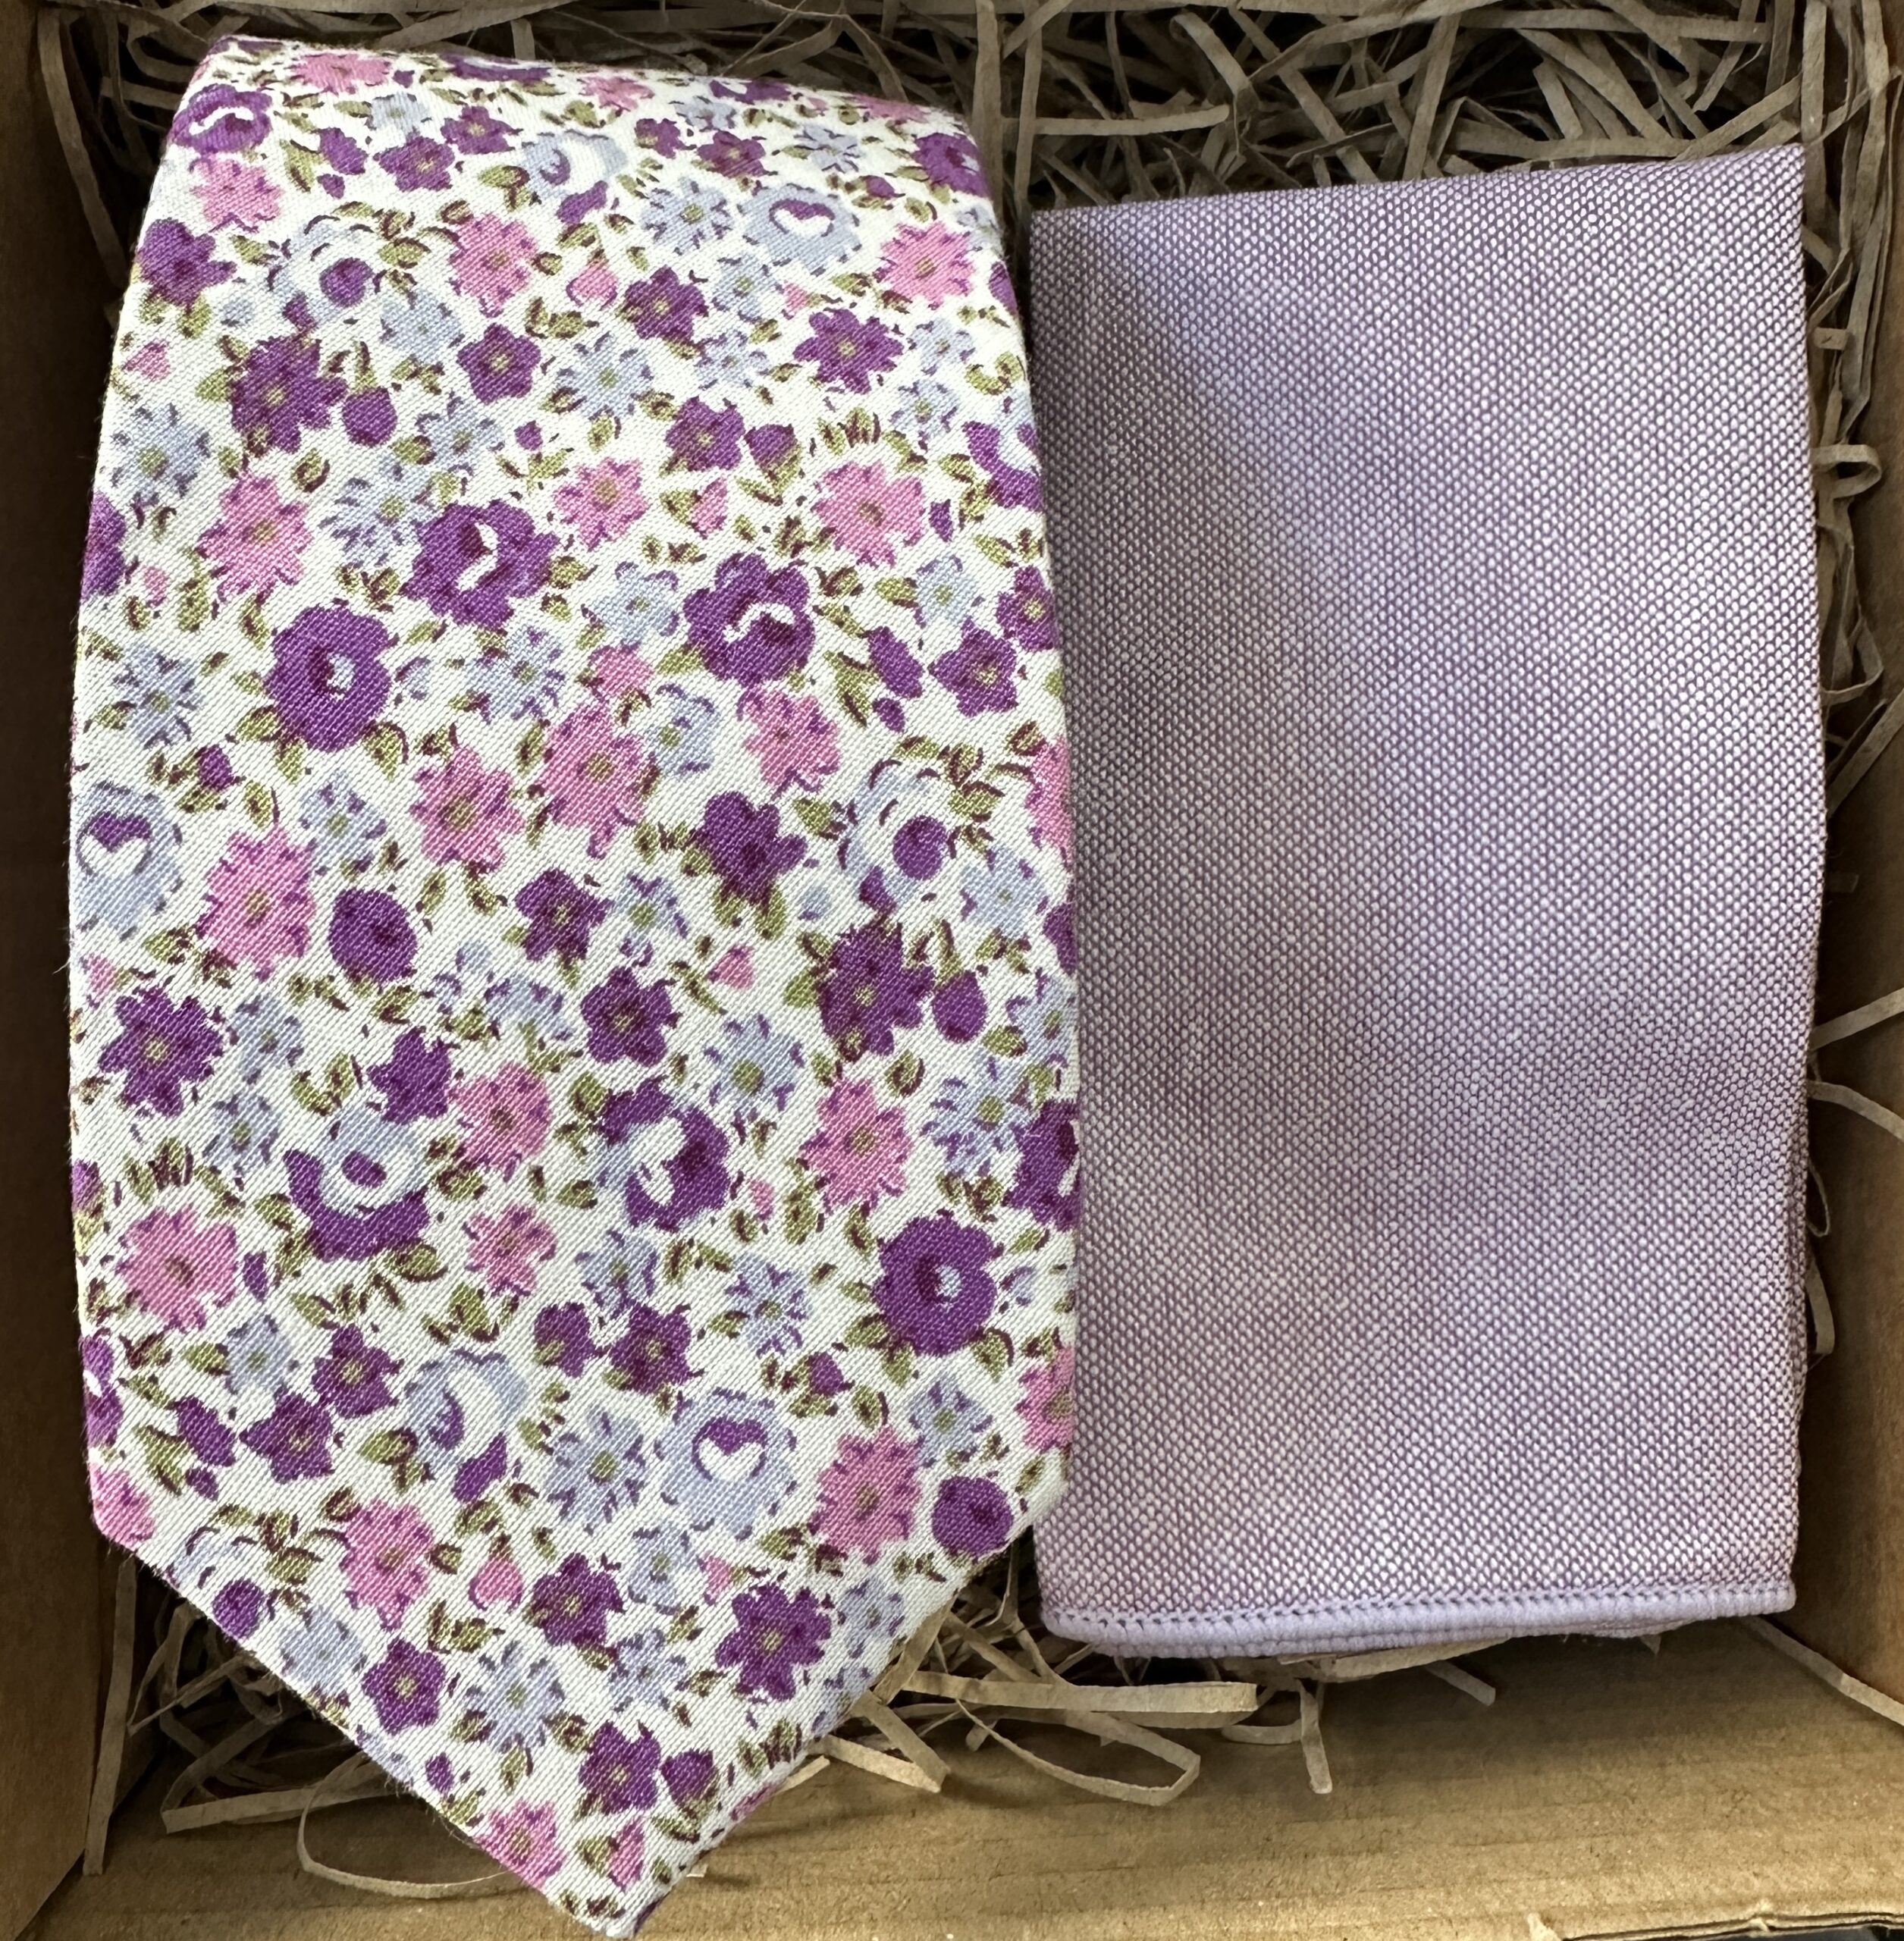 The Lupin Tie and Pocket Square